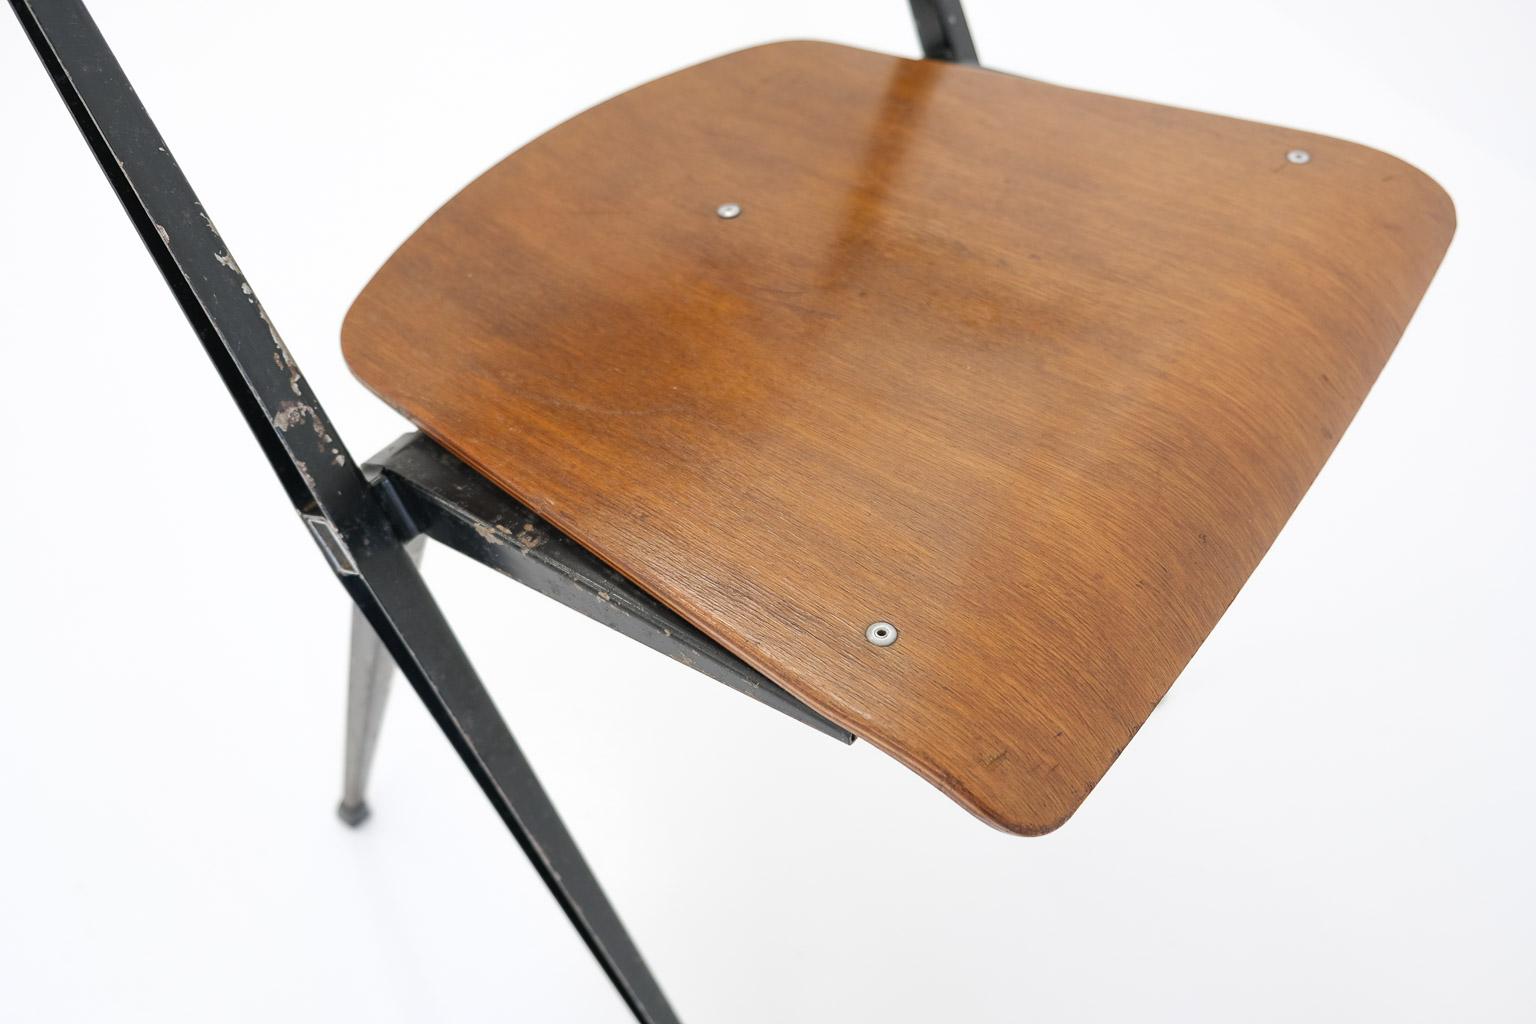 Early Pyramid Arm Chair by Wim Rietveld for Ahrend de Cirkel from Feb. 1964 For Sale 4